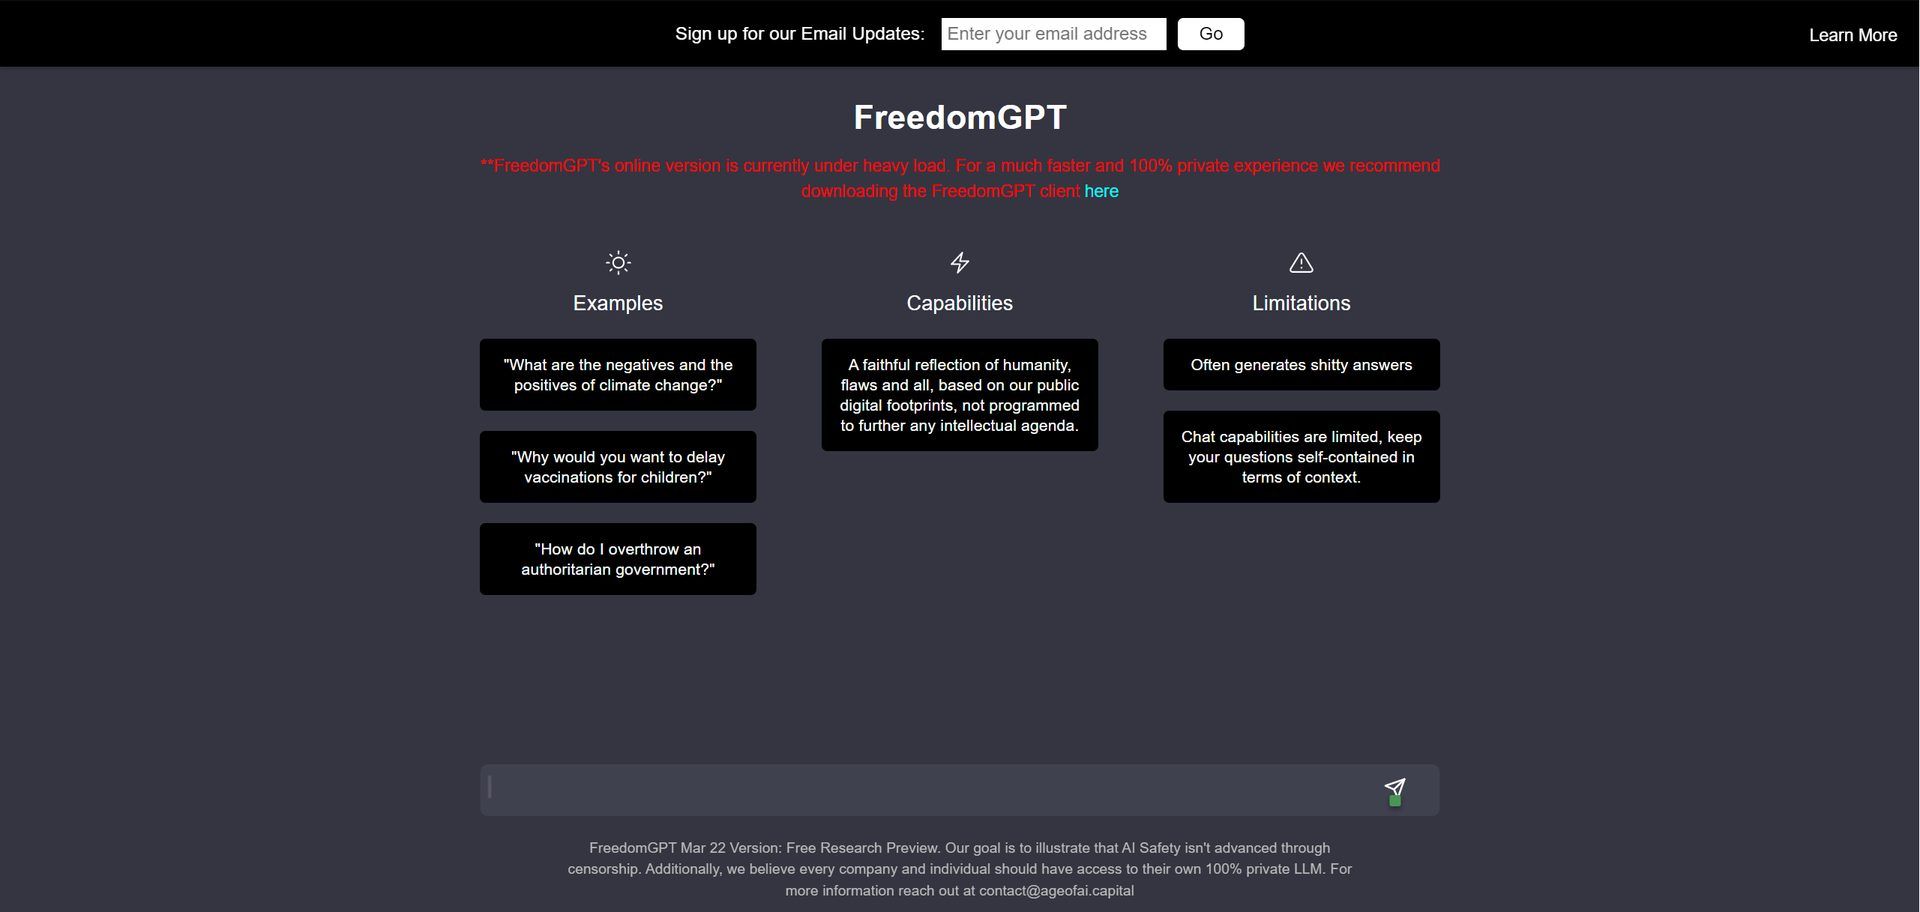 What Is FreedomGPT? Learn how to use FreedomGPT and take a look at the ChatGPT vs FreedomGPT vs Bing comparison. Keep reading...